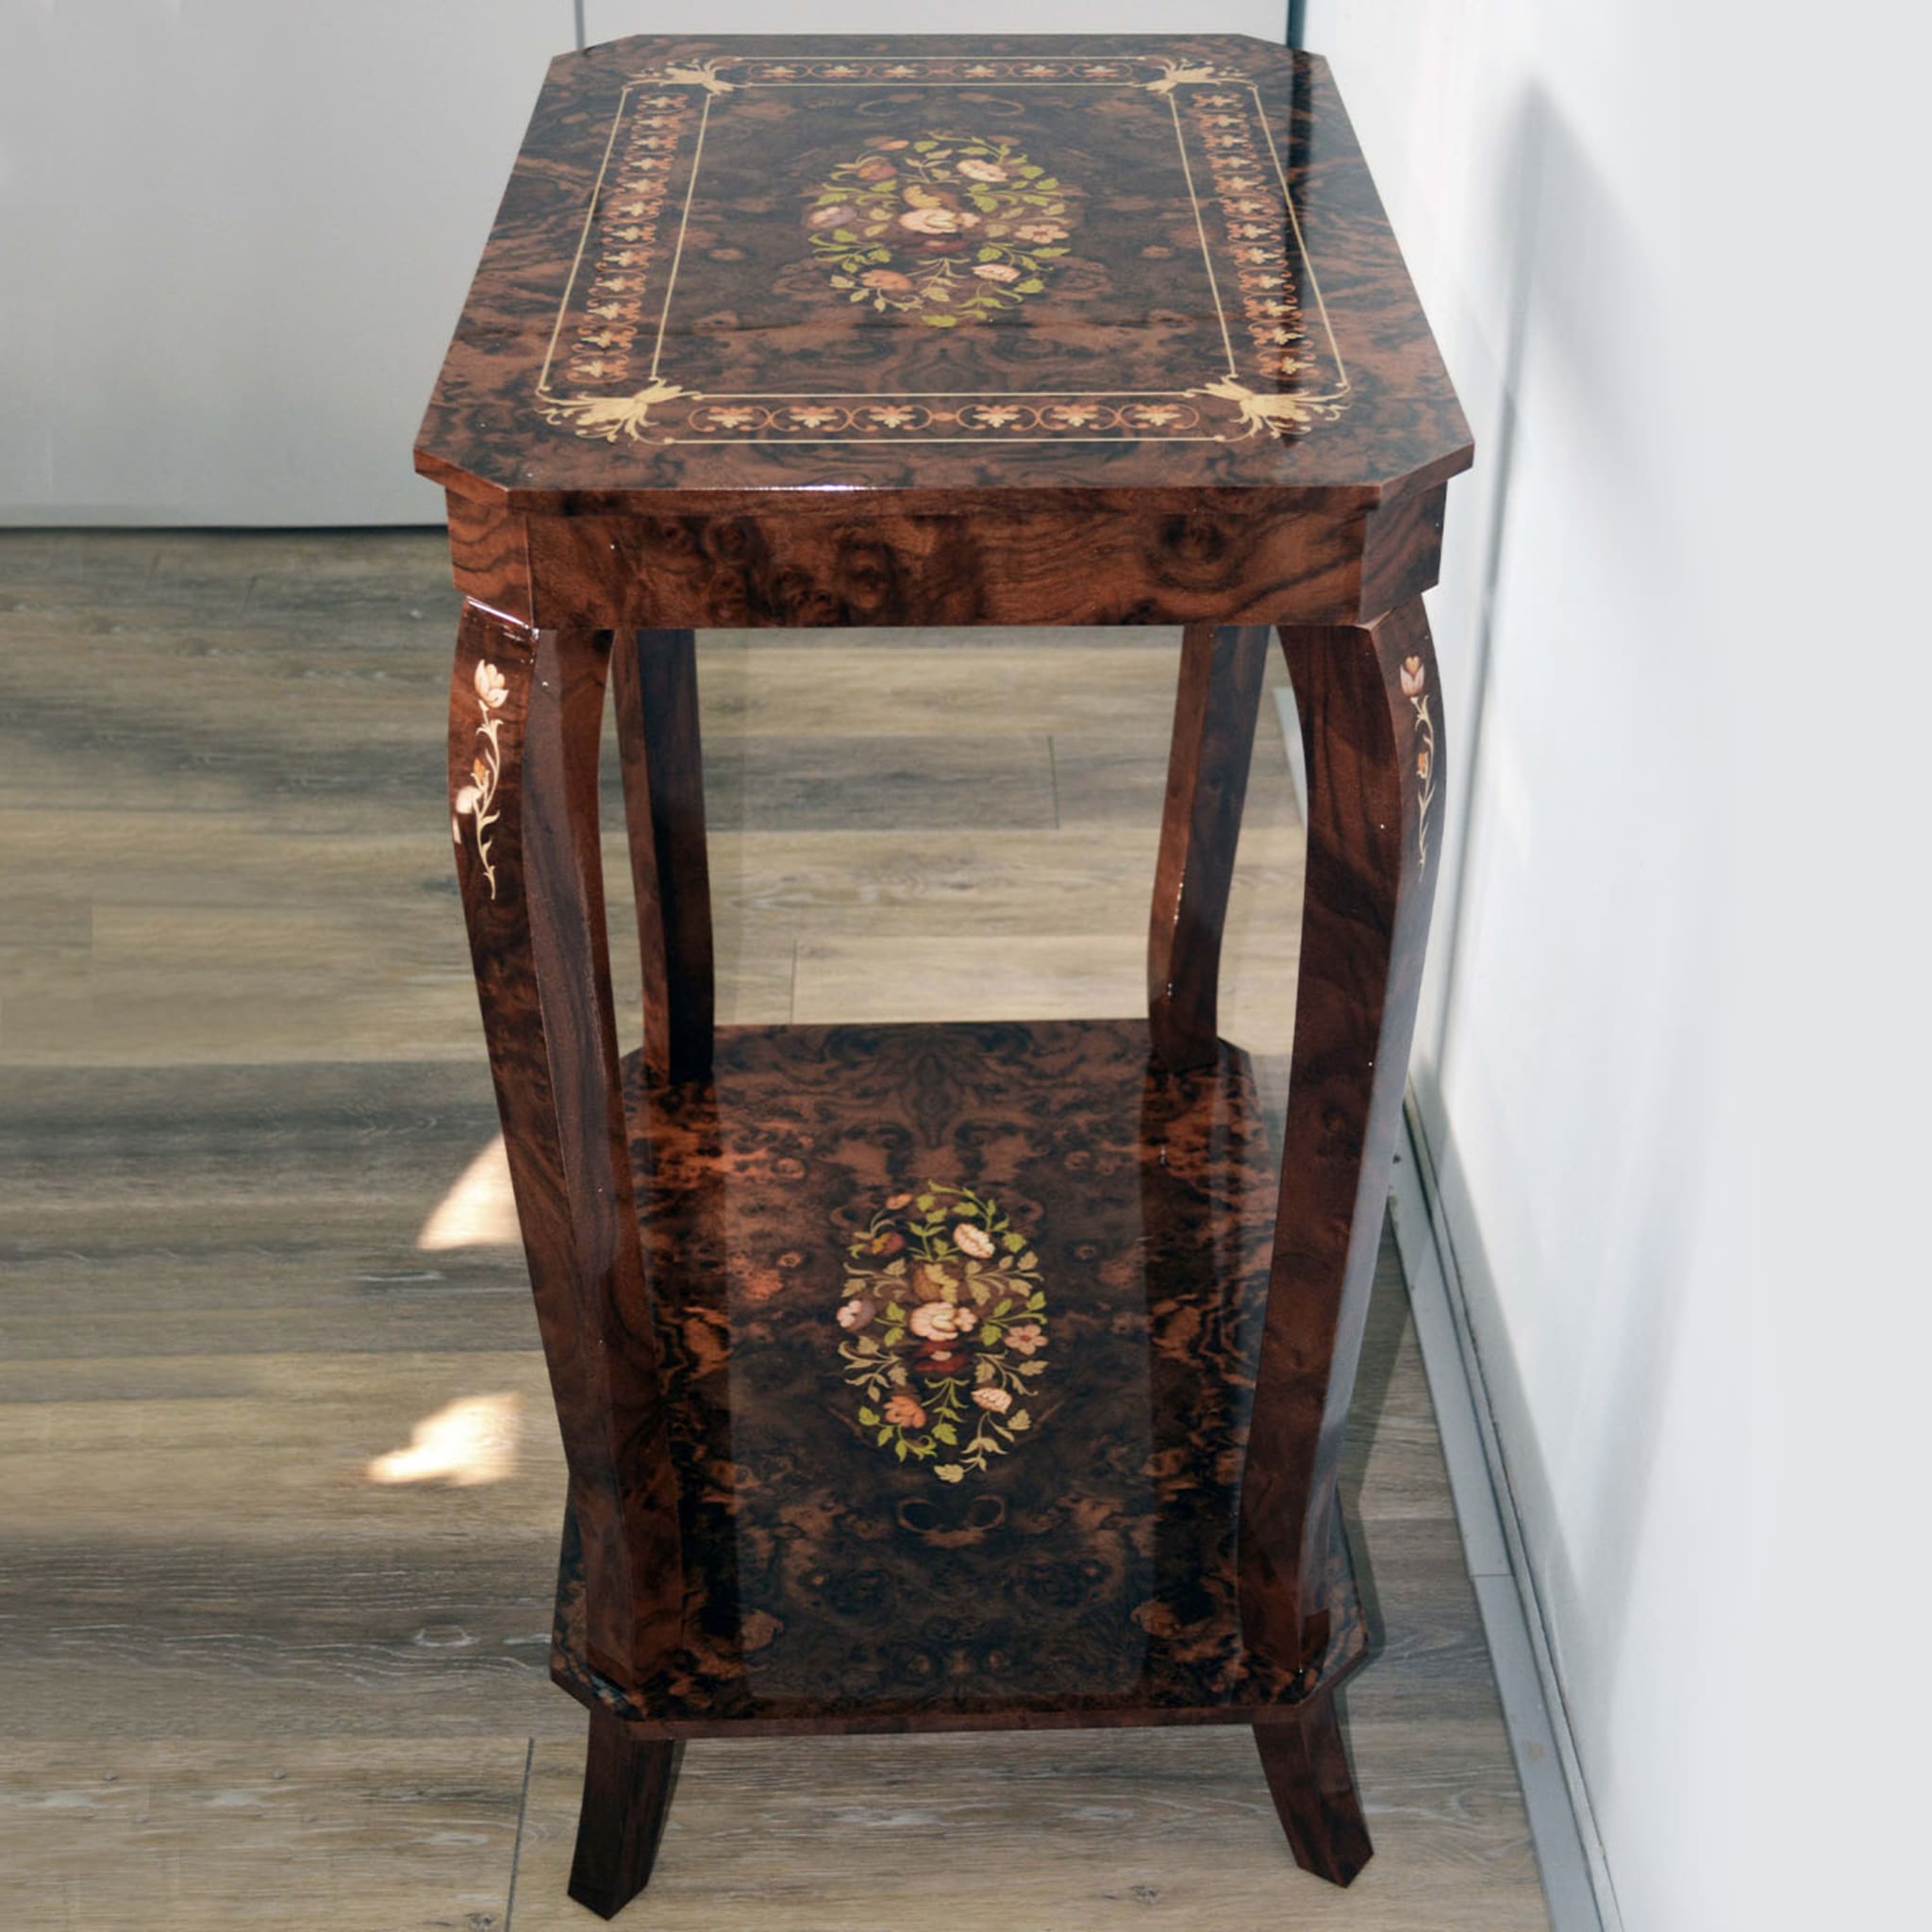 Musical Floral Briar Side Table with Storage Unit - Alternative view 4